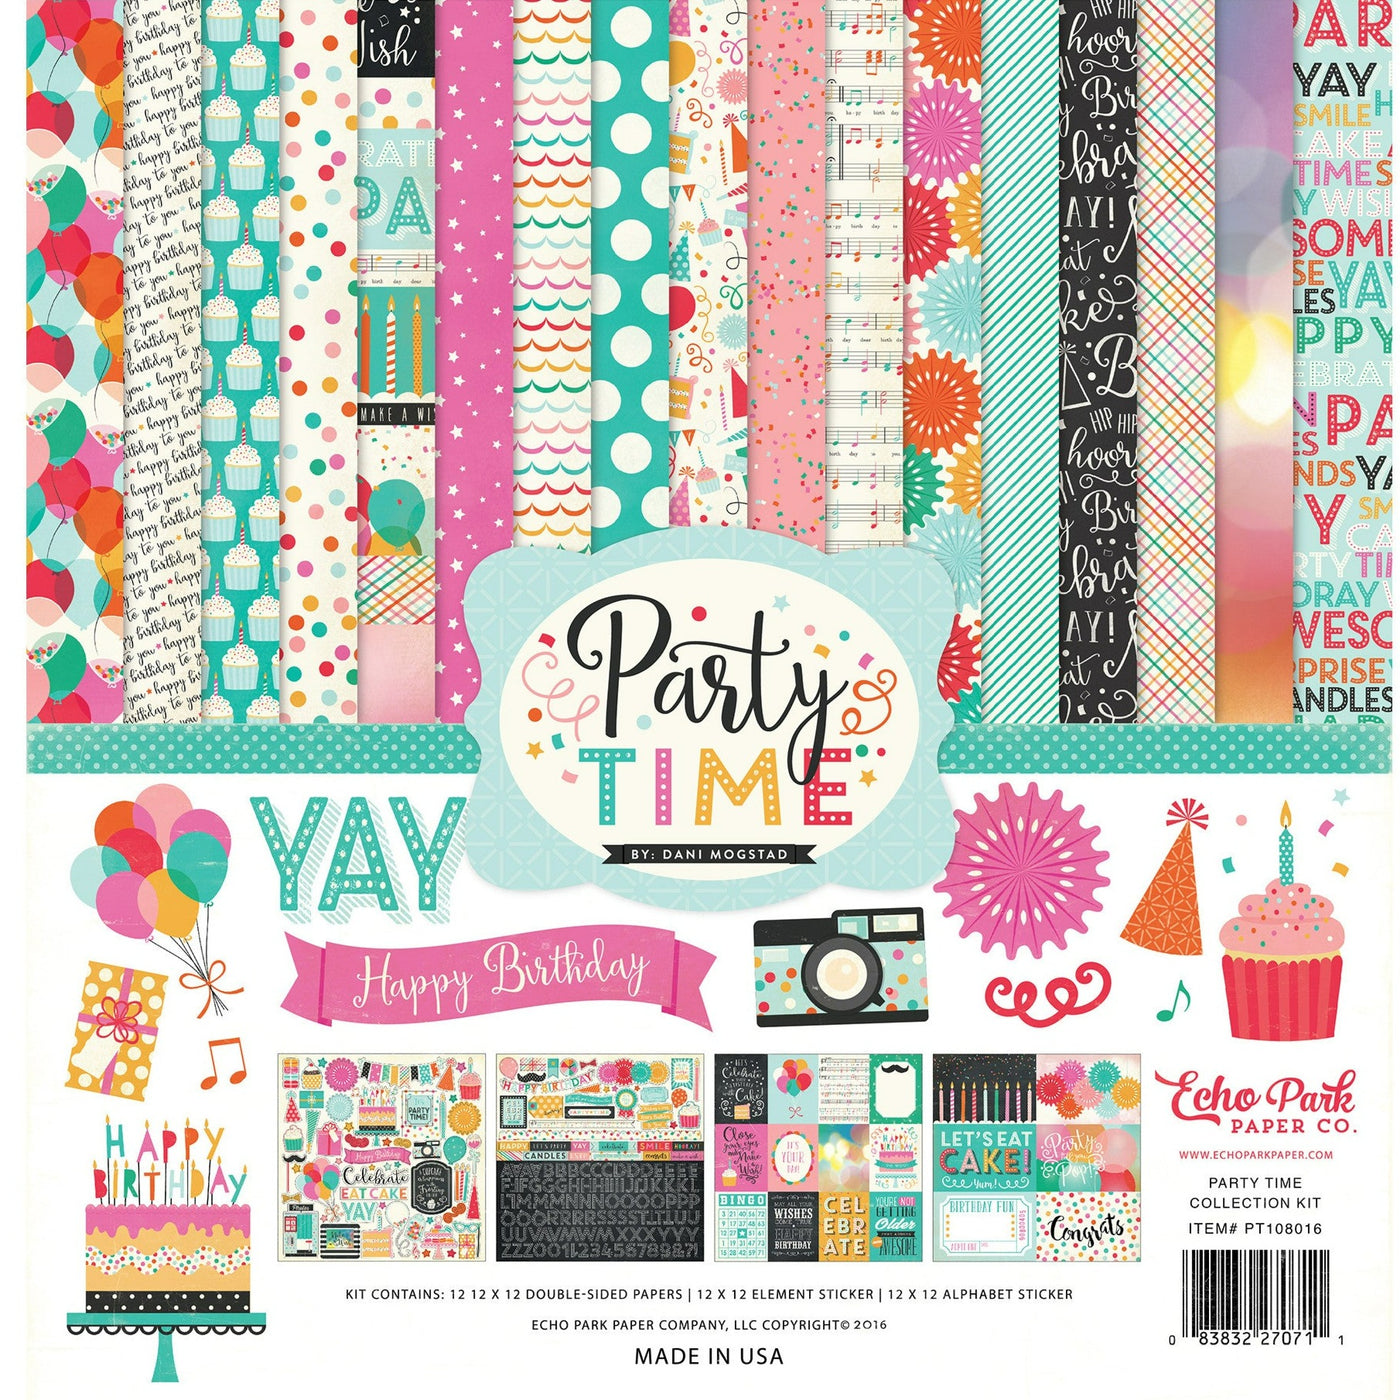 PARTY TIME page collection kit includes 12 double-sided cardstock sheets and coordinated sticker elements - by Echo Park Paper Co.